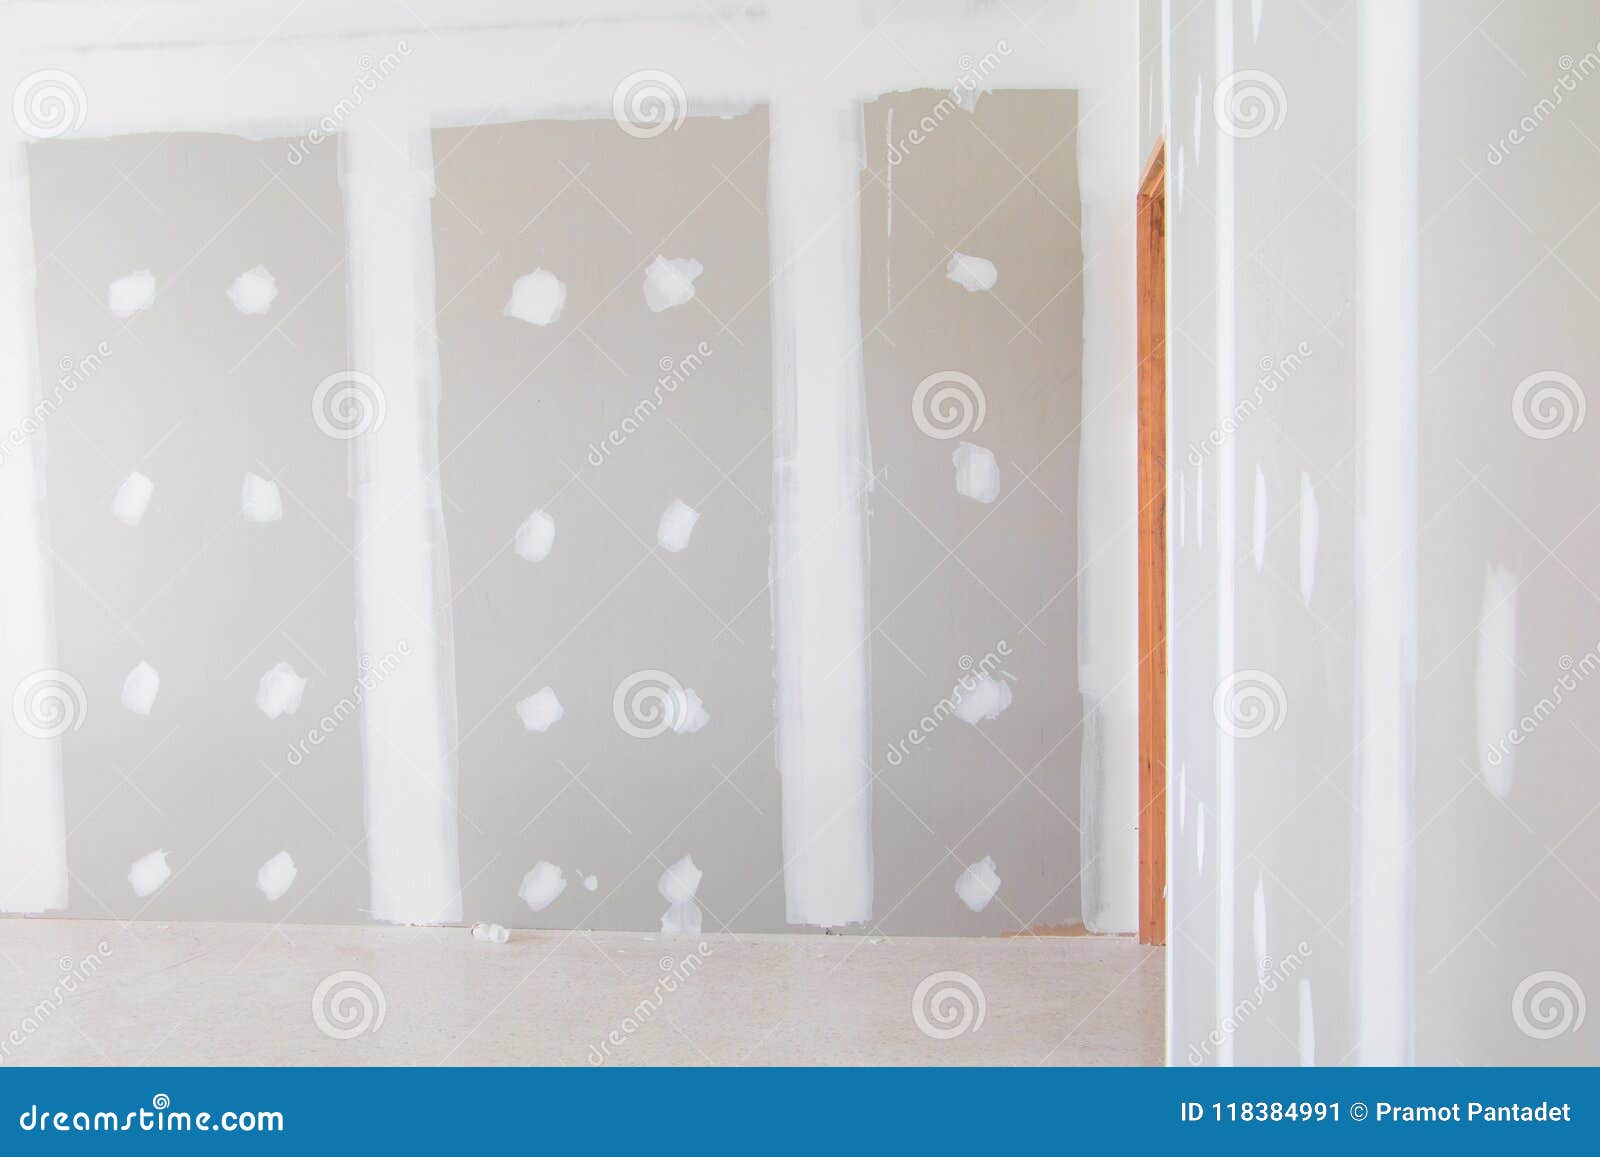 Gypsum Board Wall Interior Decoration Of Home At